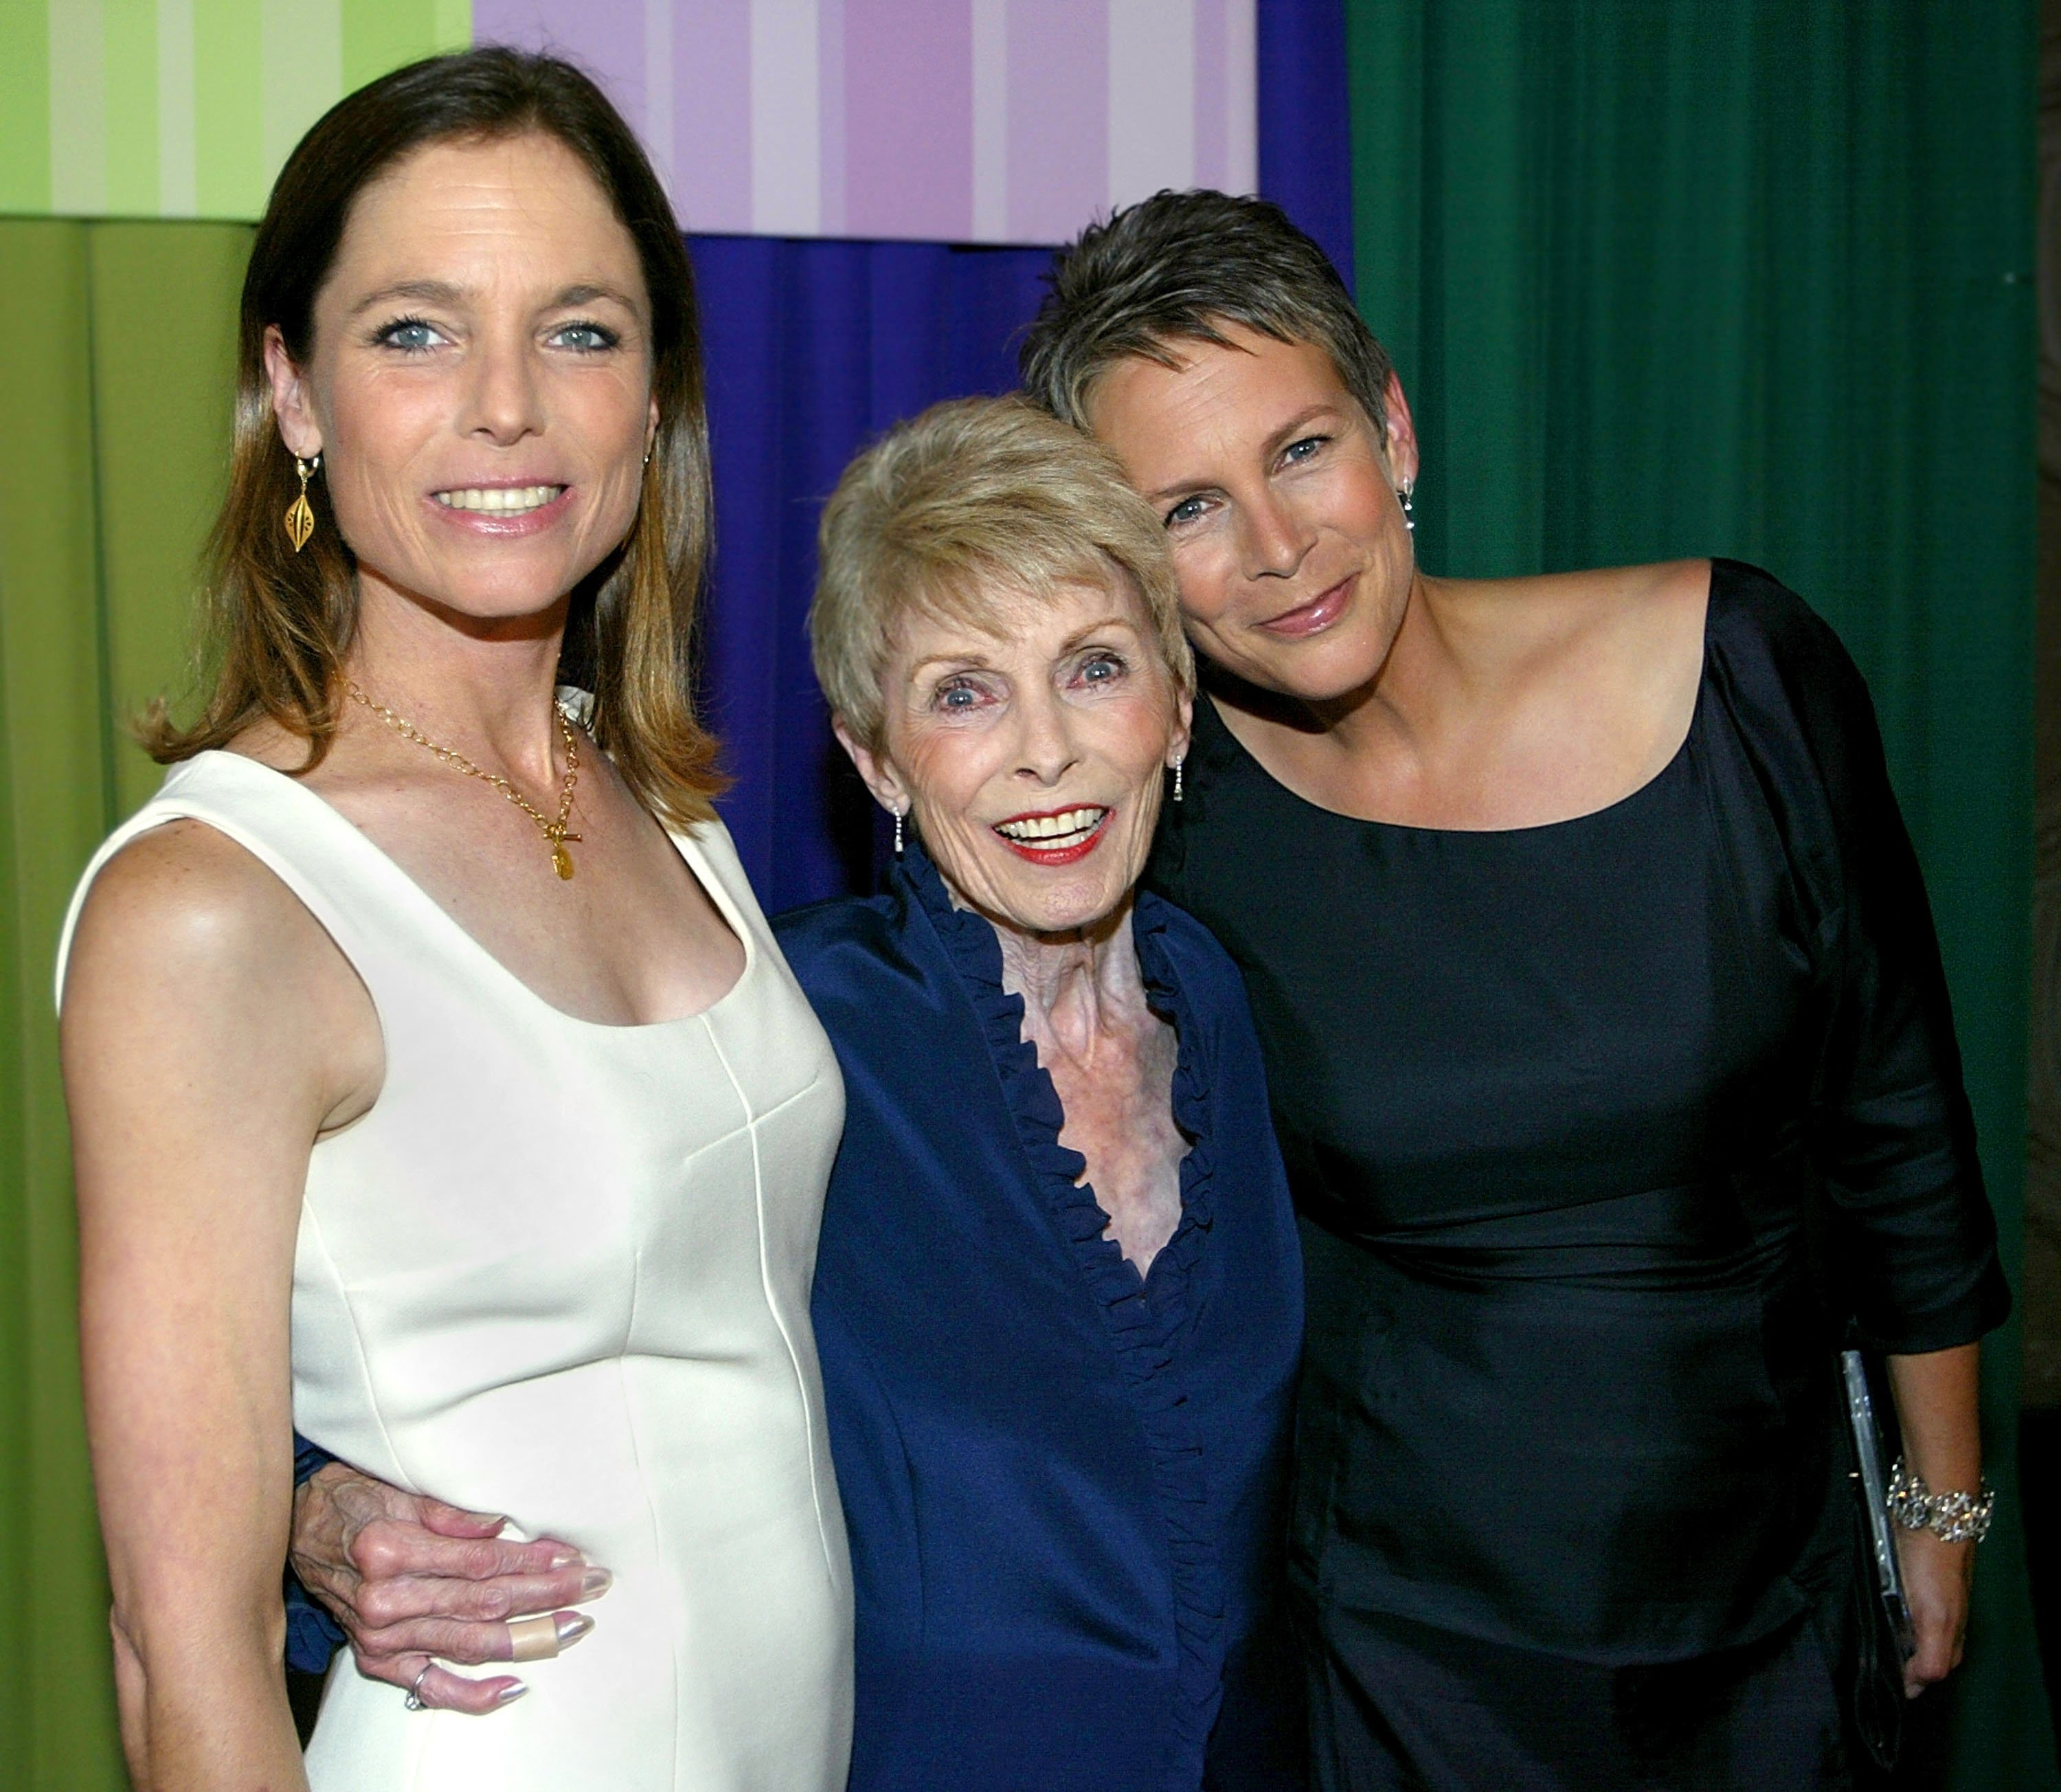 Jamie Lee Curtis poses with sister Kelly Leigh and mom Janet Leigh at the premiere of "Freaky Friday" in Hollywood in August 2003 | Photo: Getty Images